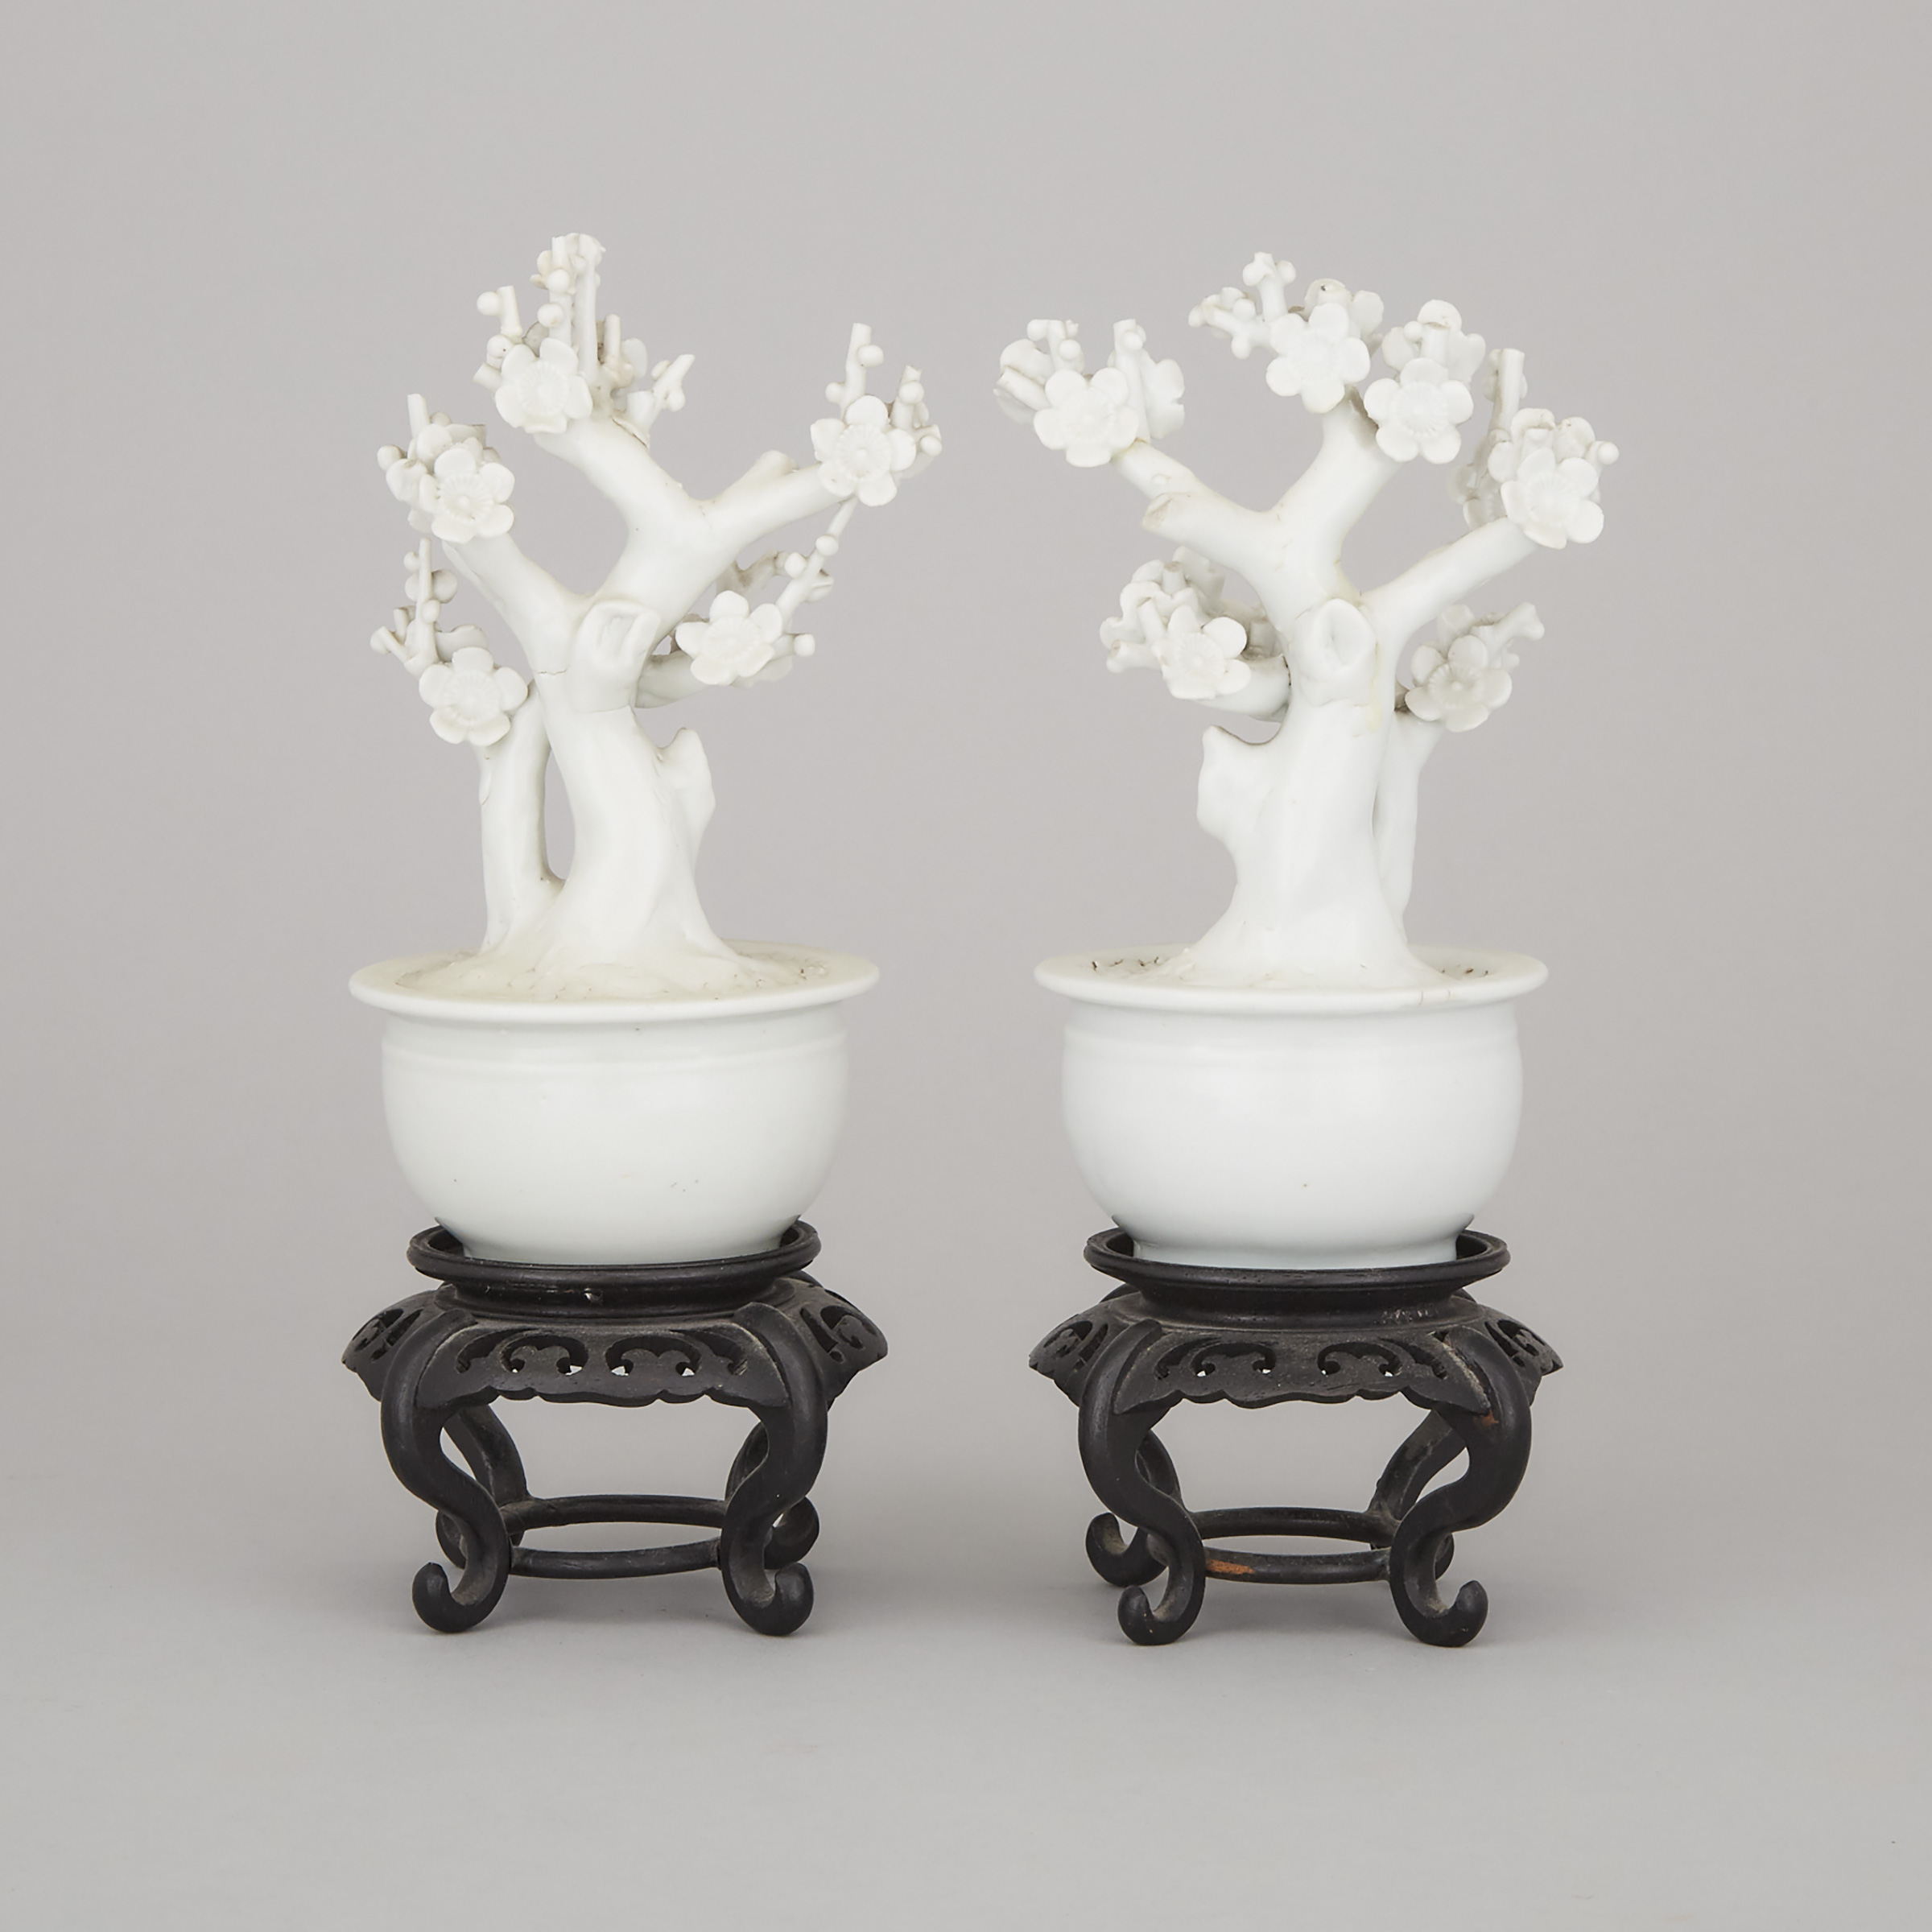 A Pair of Dehua Potted Plants, Qing Dynasty